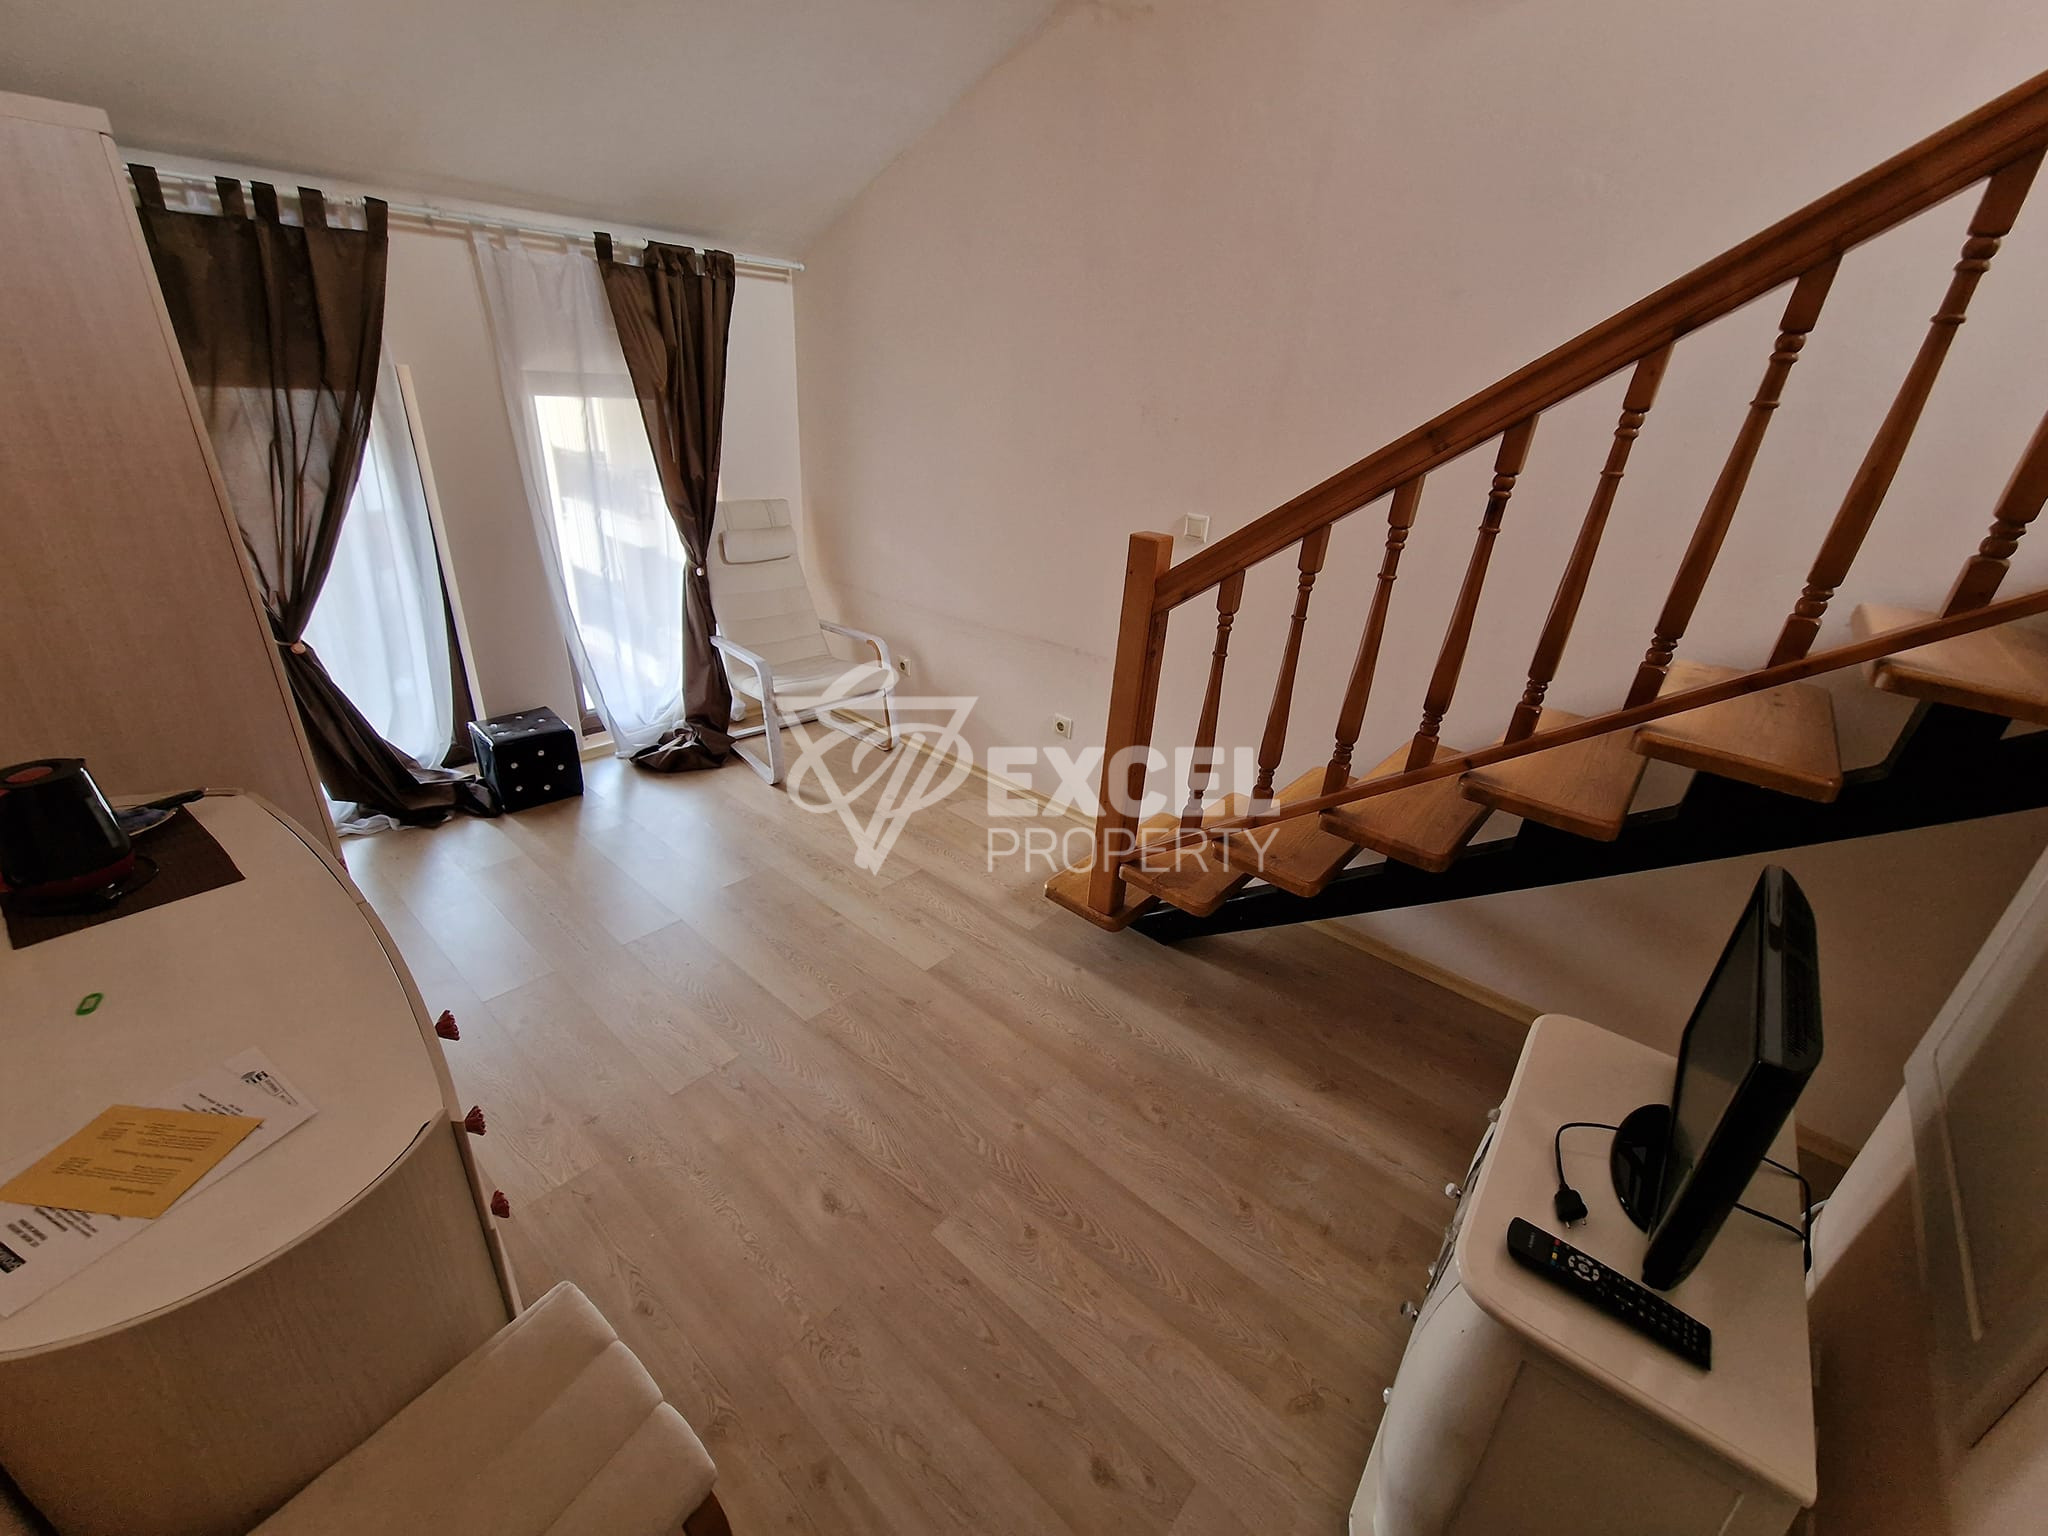 A maisonette apartment in a building with a low maintenance fee next to the Tane hotel, Bansko